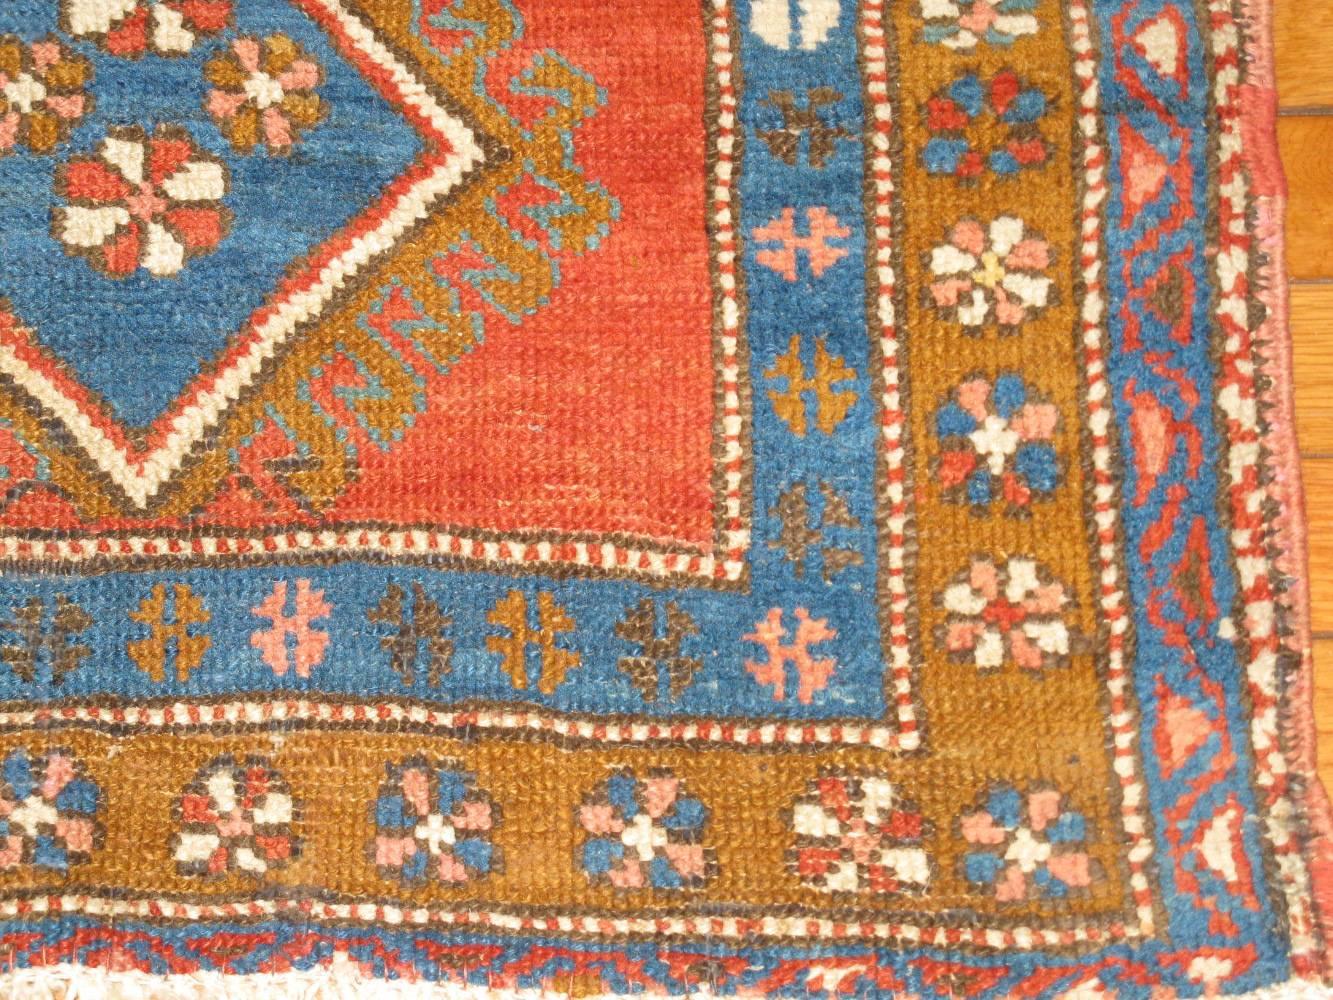 Hand-Knotted Antique Persian Bakhshayesh Runner Rug